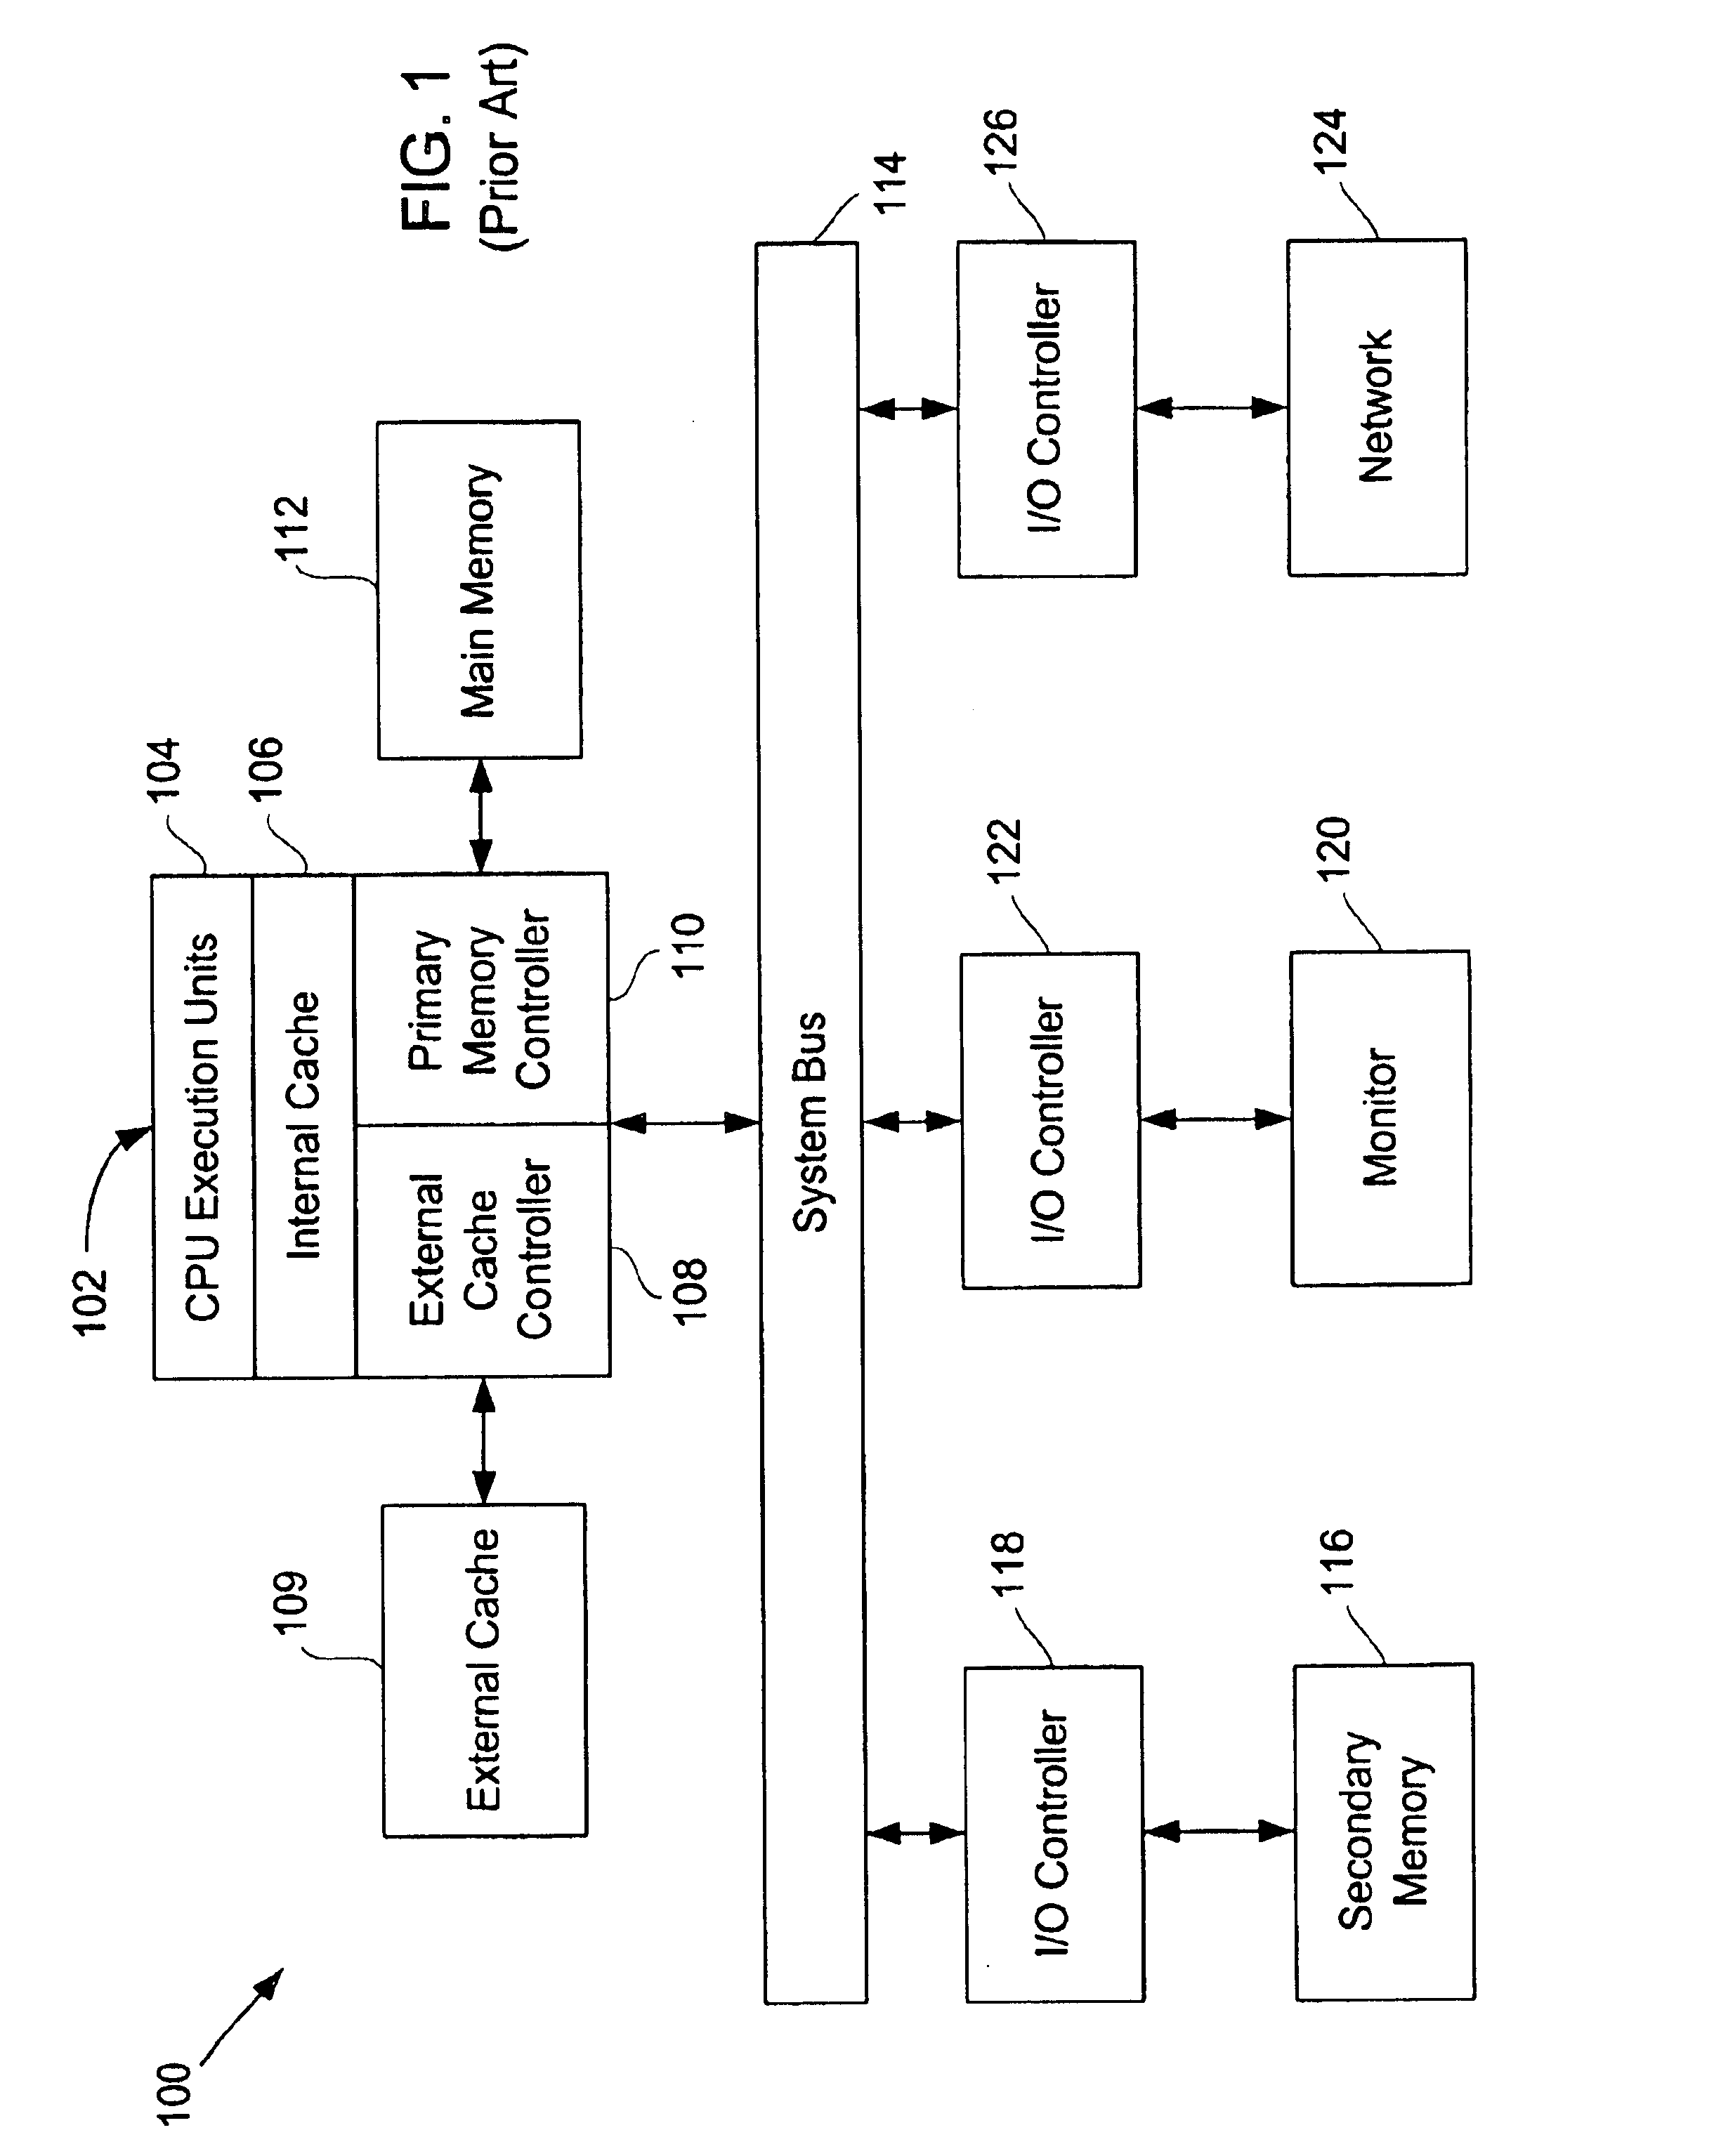 Memory controller and method using read and write queues and an ordering queue for dispatching read and write memory requests out of order to reduce memory latency